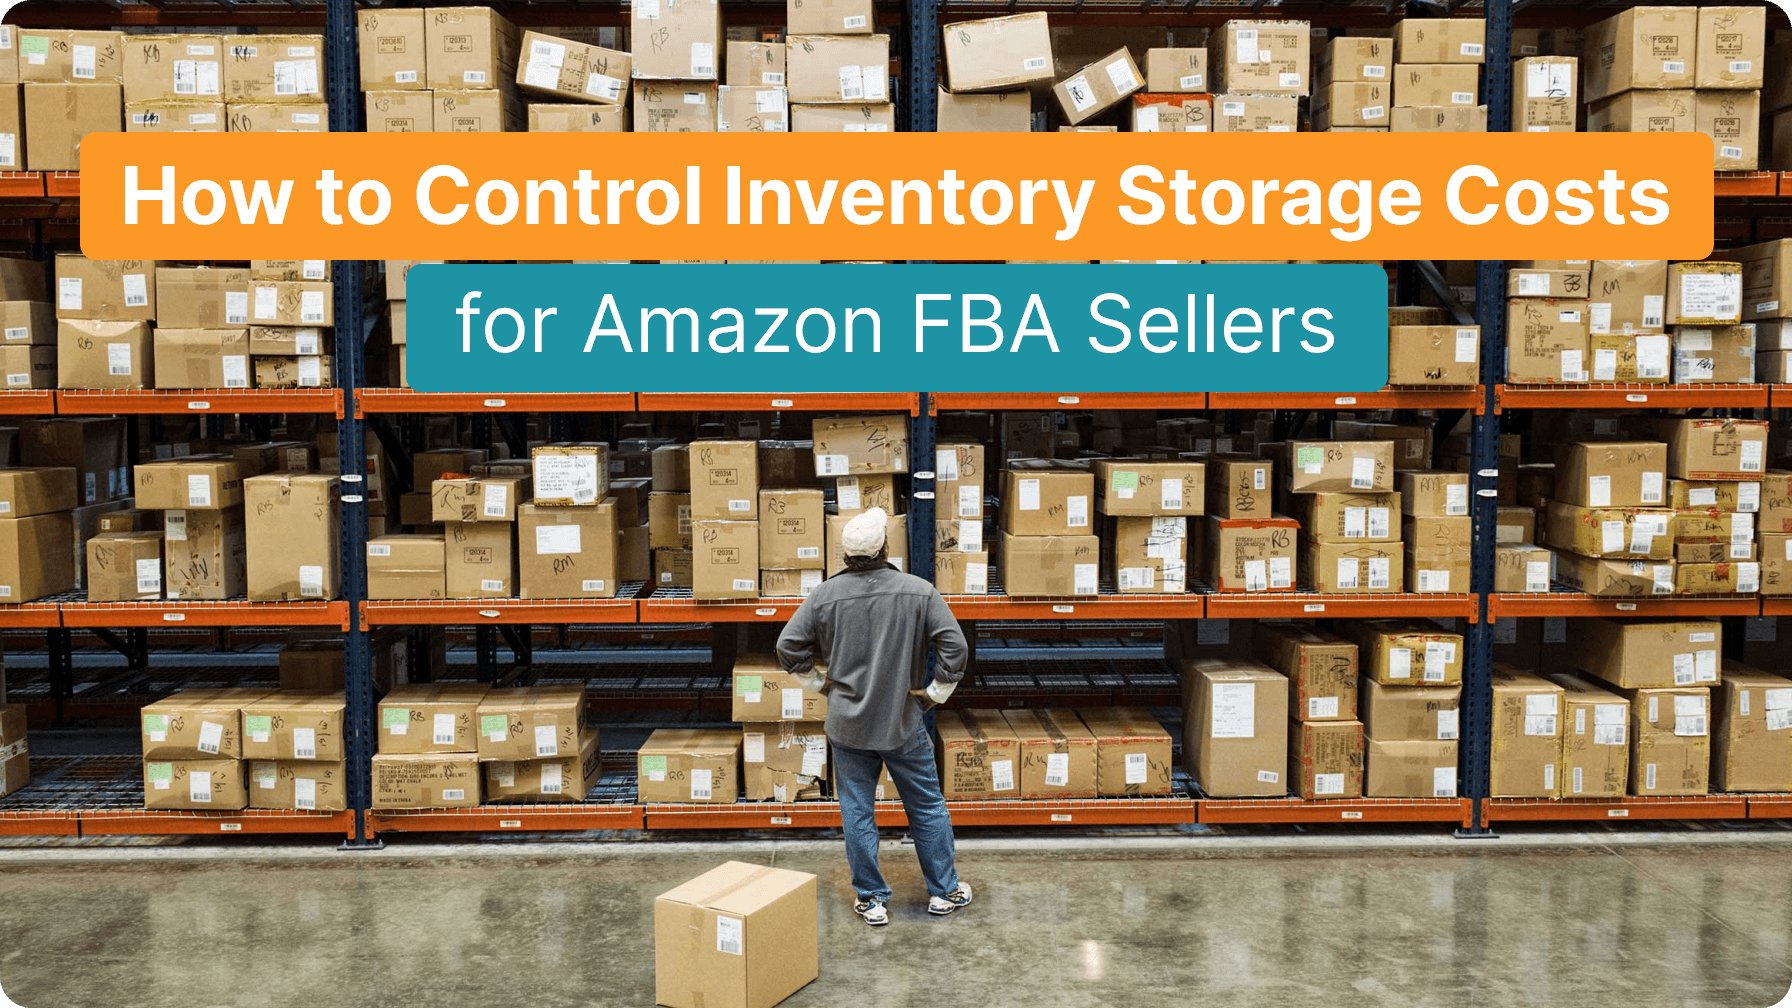 How to Control Inventory Storage Costs for Amazon FBA Sellers